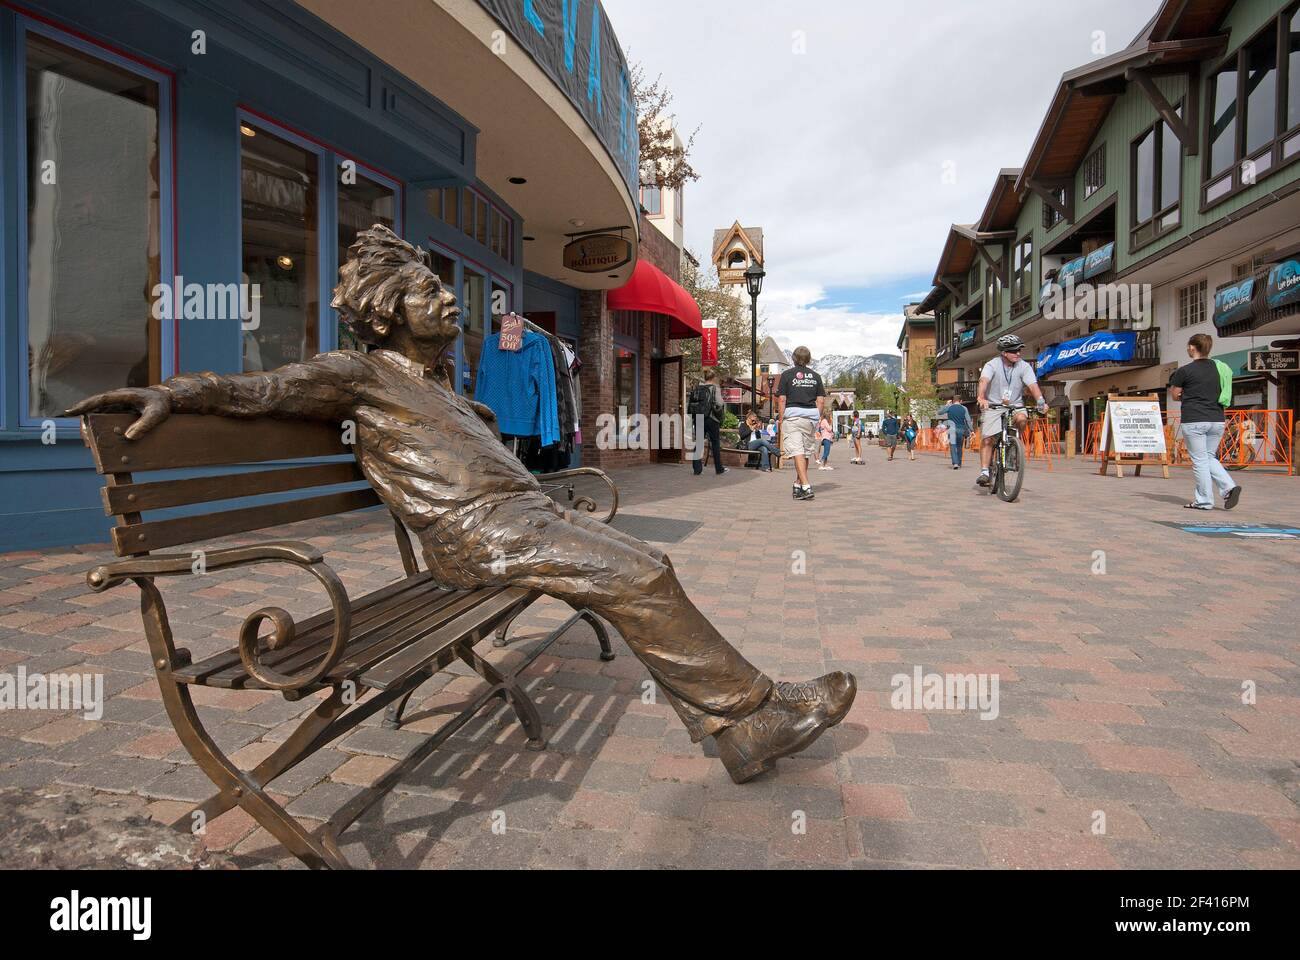 Full-sized bronze statue of Albert Einstein (by the sculptor Gary Lee Price) in Vail, Eagle County, Colorado, USA Stock Photo